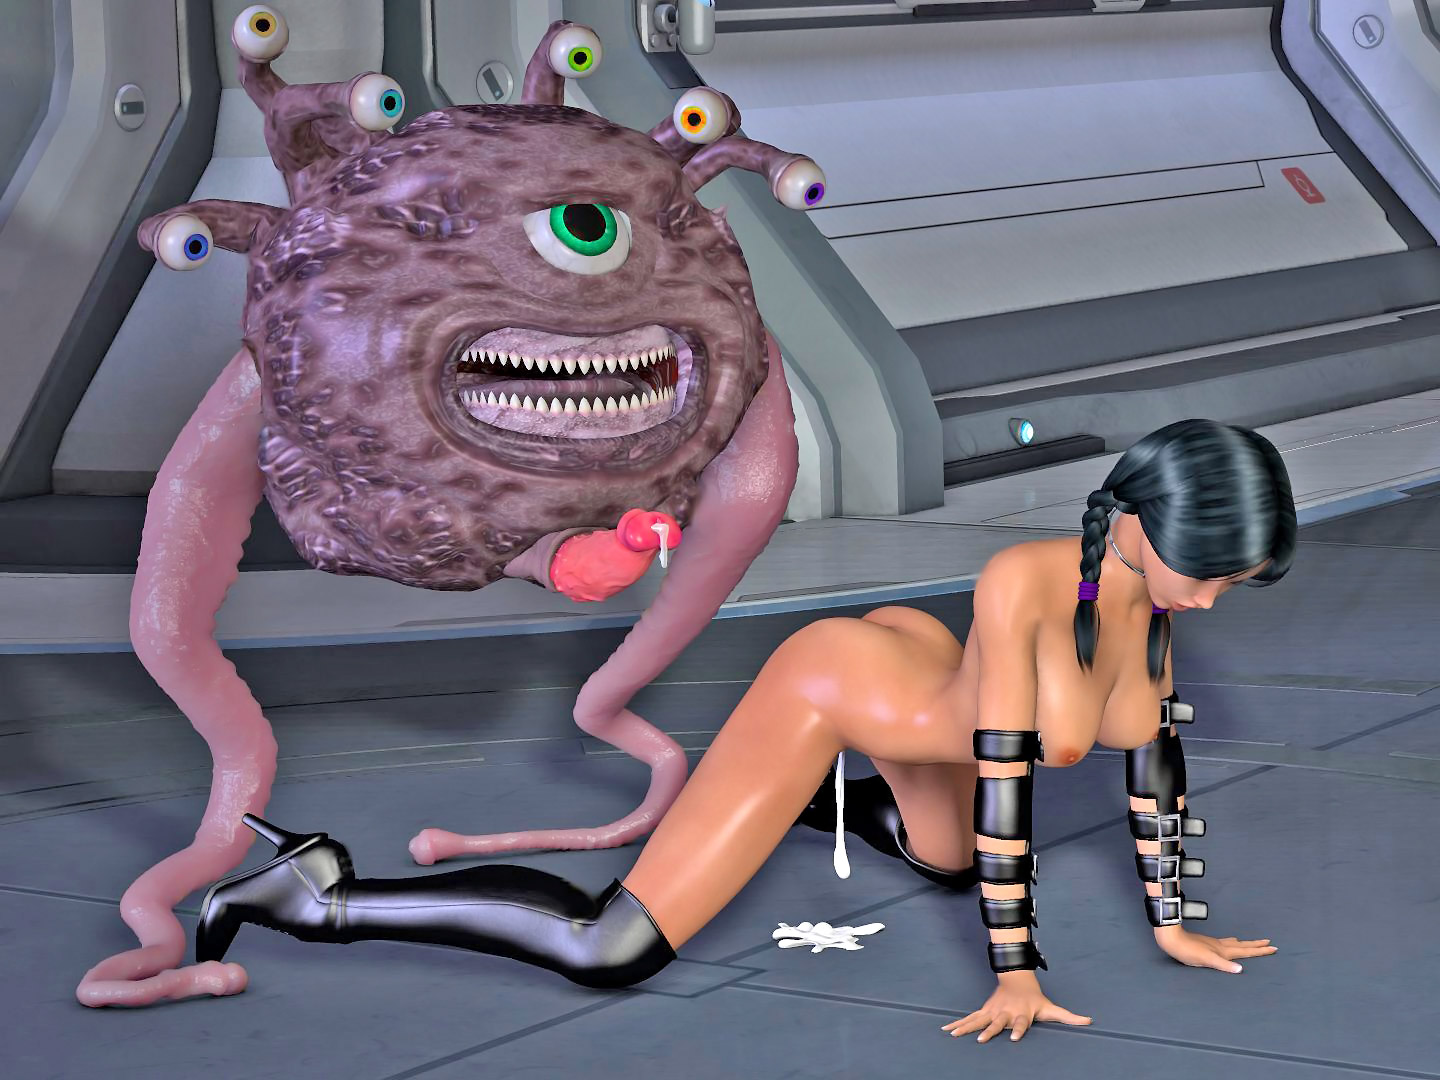 Alien Tentacle Sex Toon - Spaceship fuck session with a slimy tentacle creature | KingdomOfEvil 3d